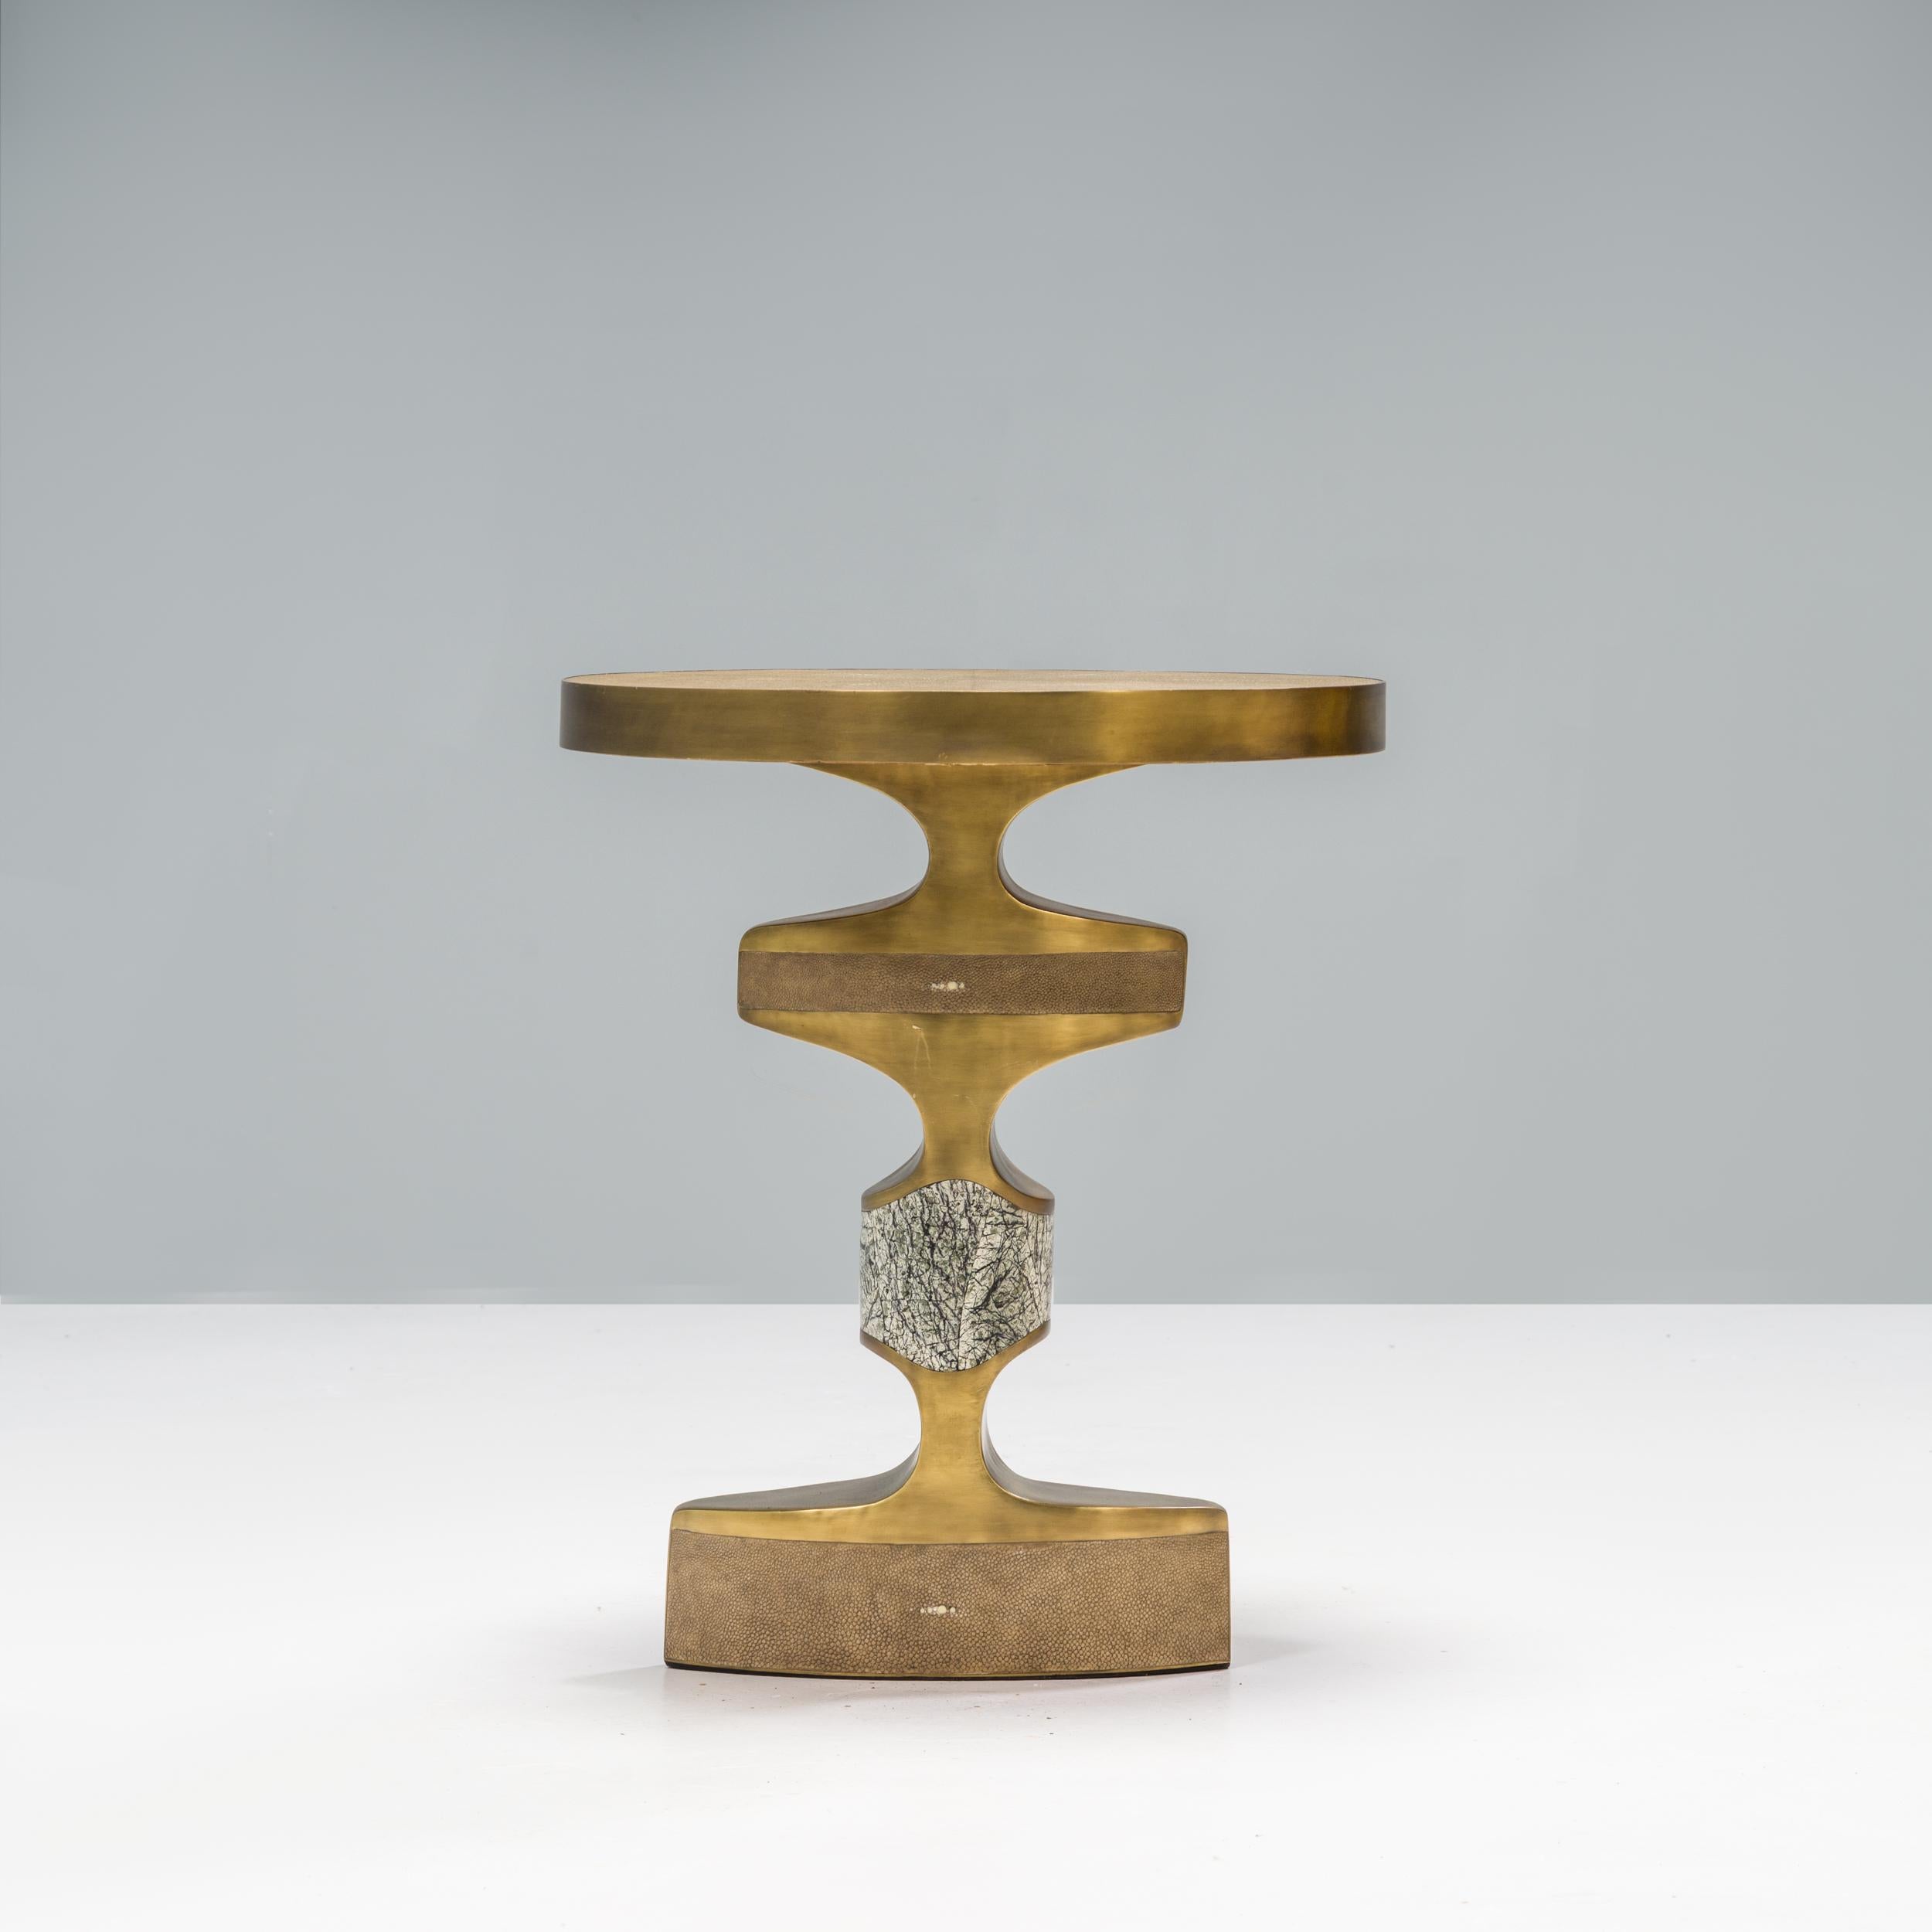 Ria & Yiouri Augousti founded their Parisian design company in 1989, inspired by the Art Deco period and the exotic materials often used in design during that period.

Handmade by skilled artisans in the Philippines, the Carmen side table has a